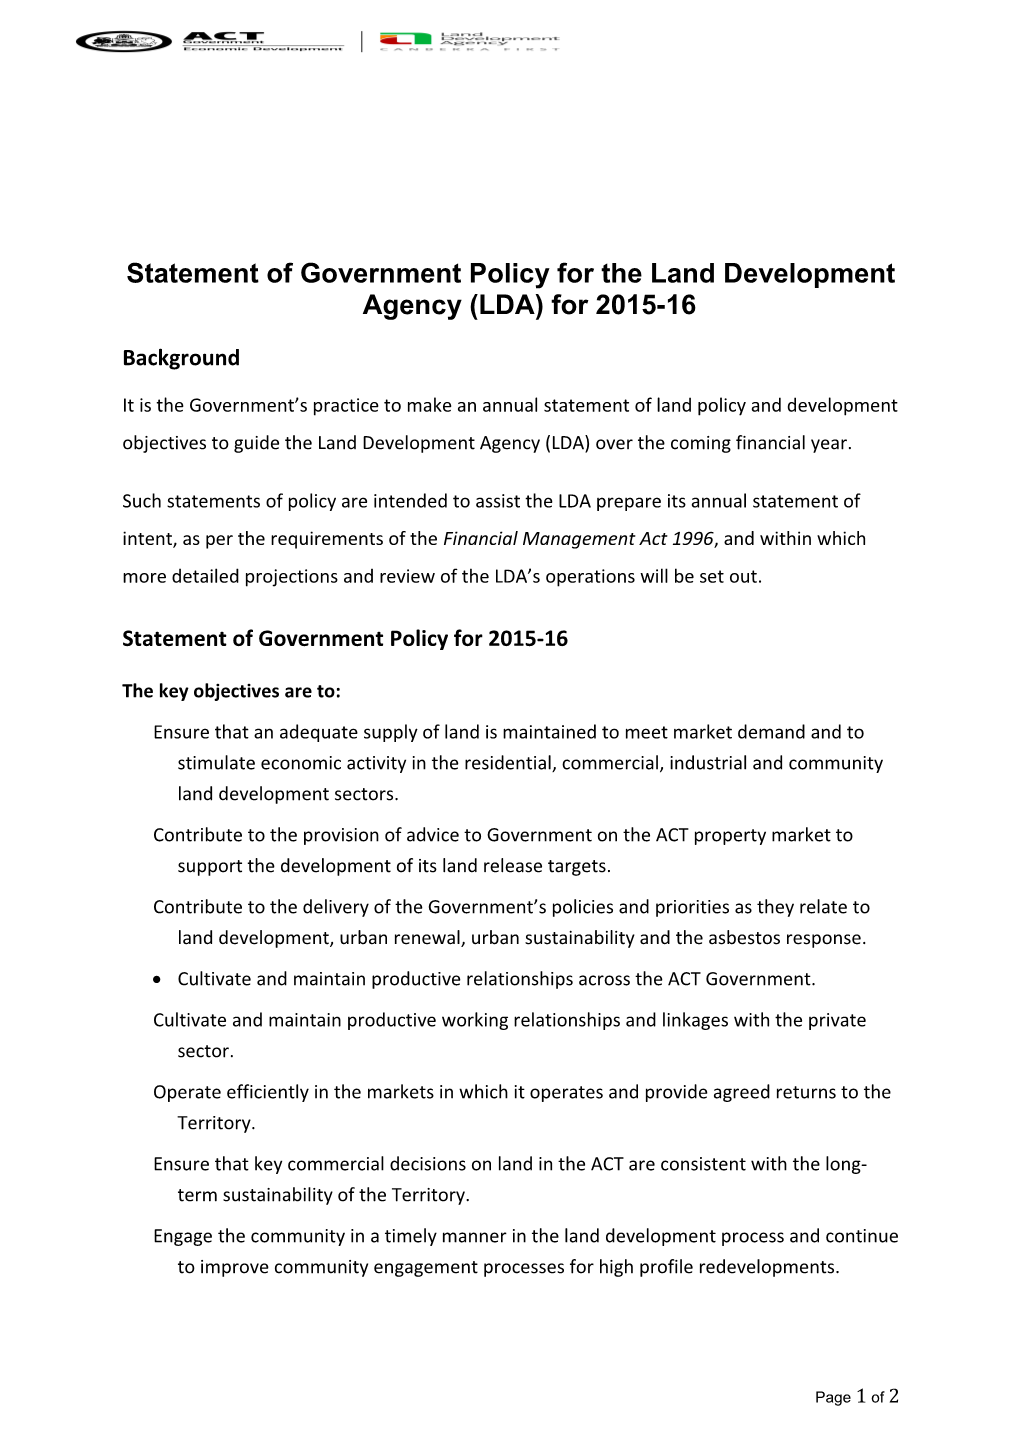 Statement of Government Policy: Land Policy and Development Objectives for 2011-12